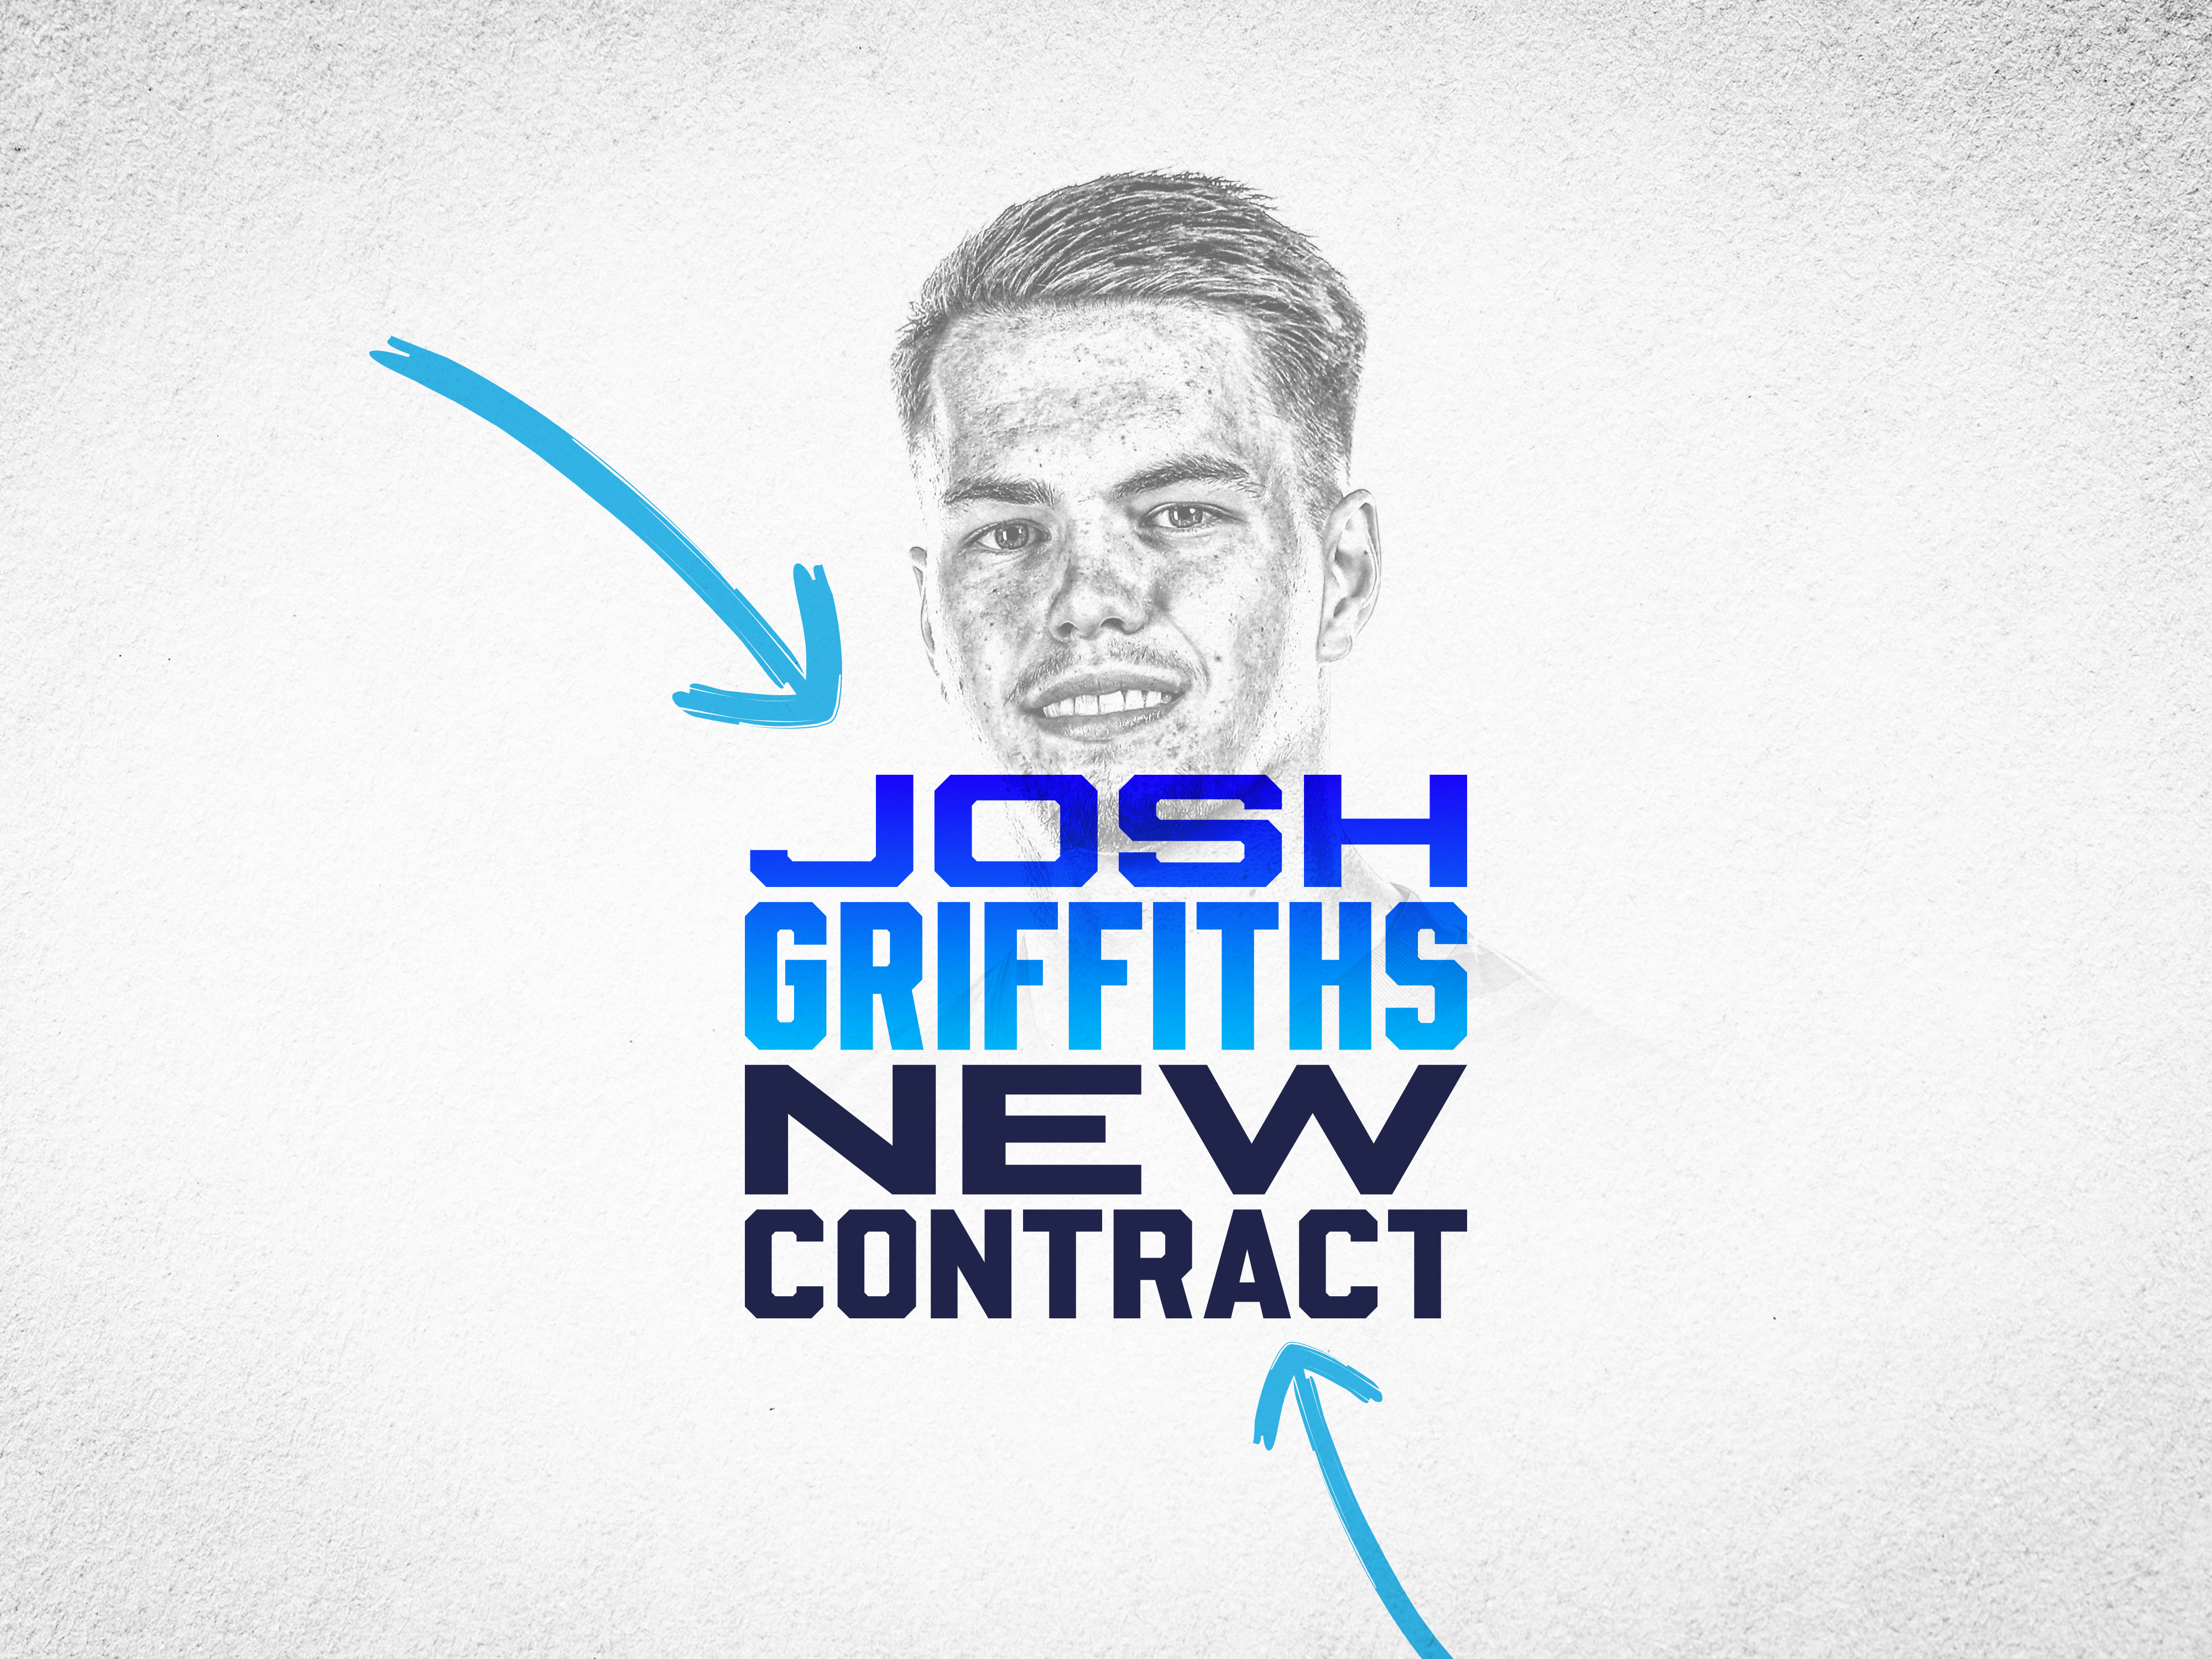 Josh Griffiths new contract graphic